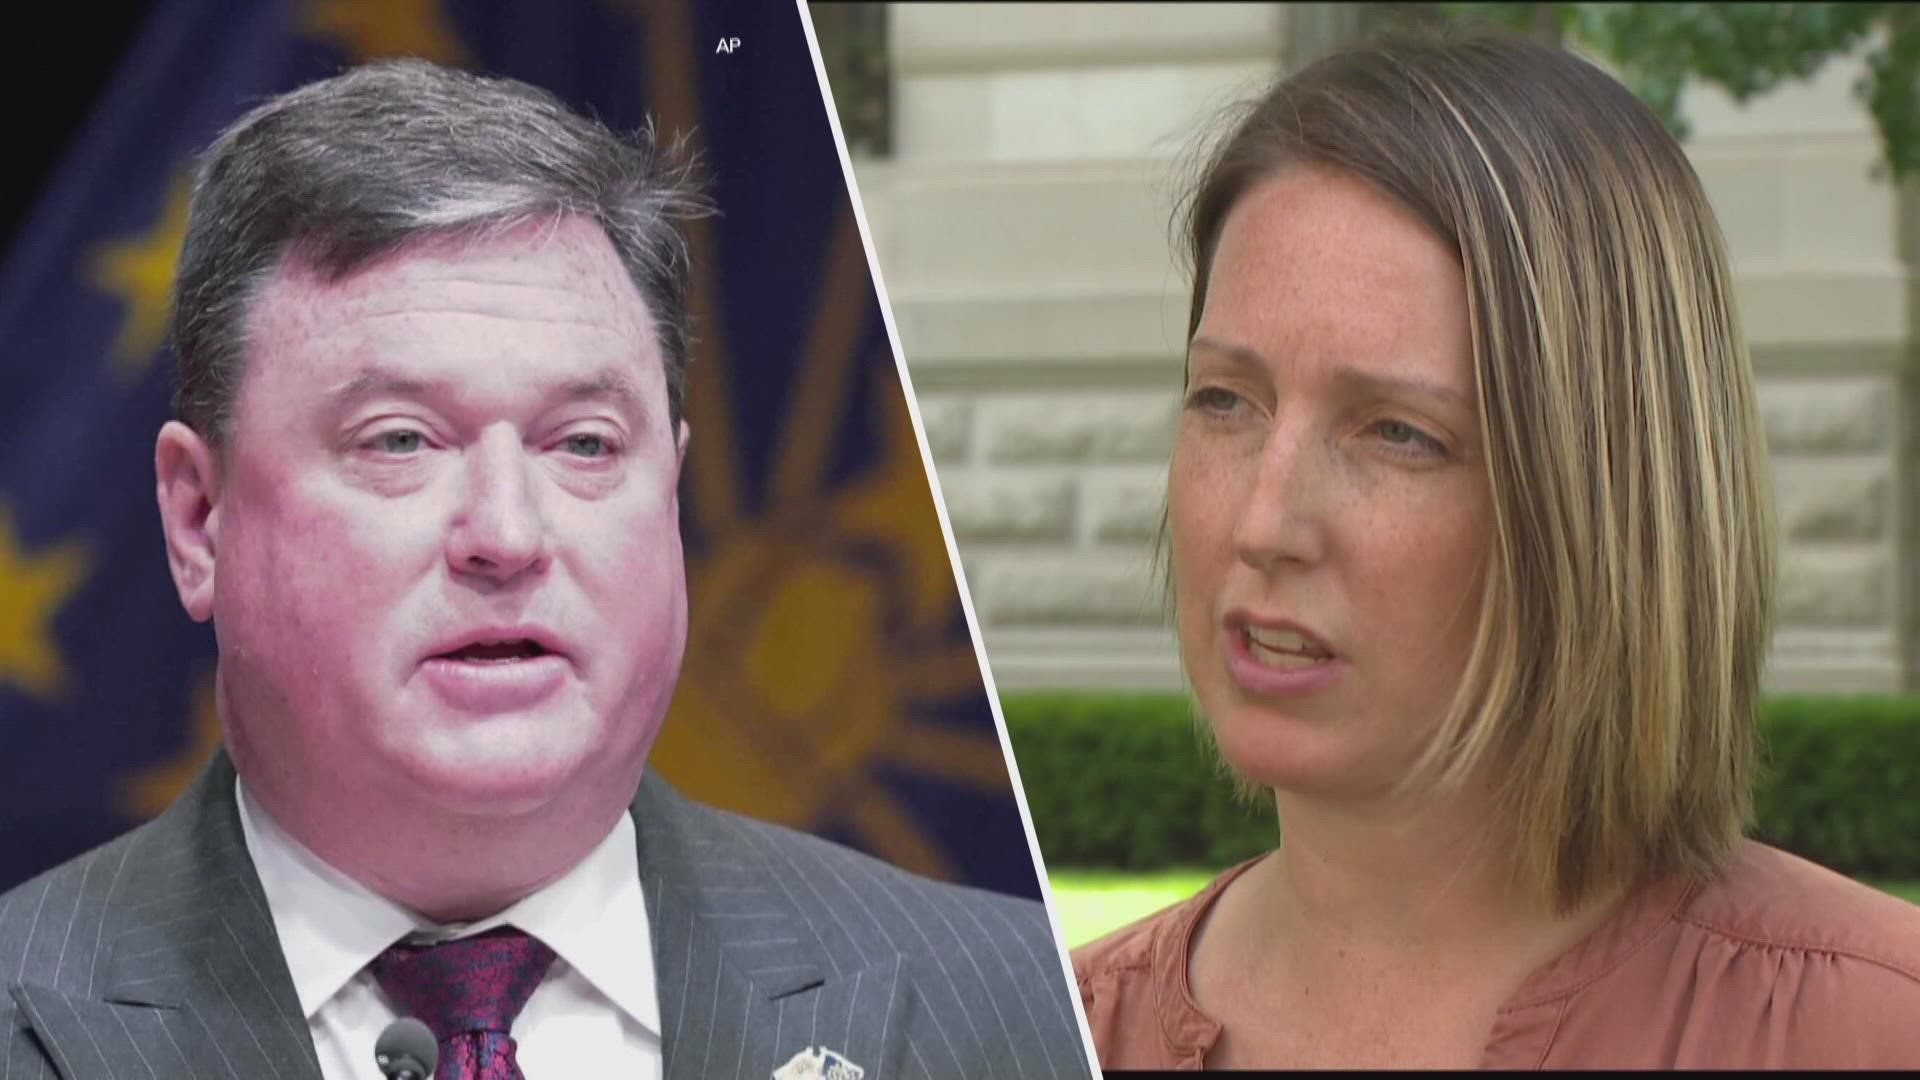 The judge denied Dr. Caitlin Bernard's request to prevent the odd Rokita from getting certain records.
The judge also found Rokita violated the state's constitution.